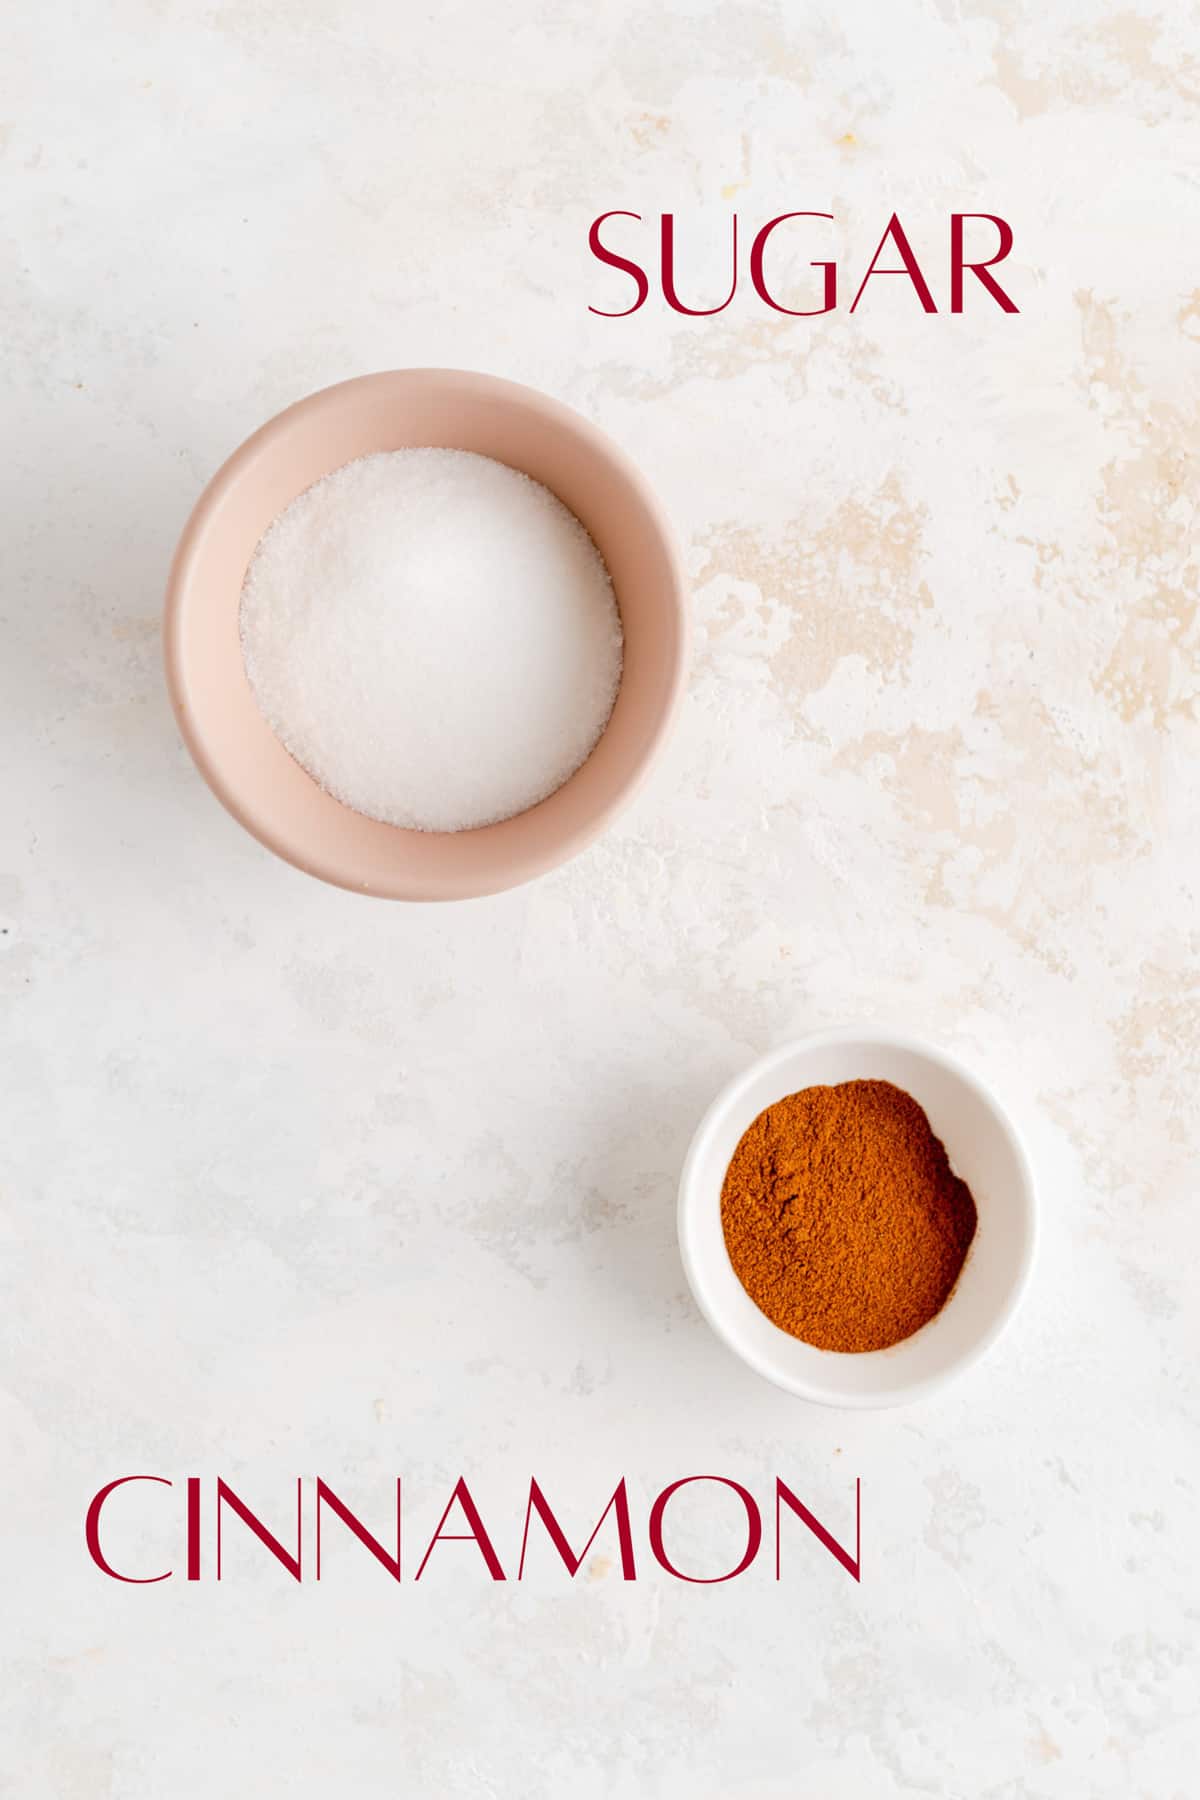 sugar and cinnamon in individual bowls on white plaster background.